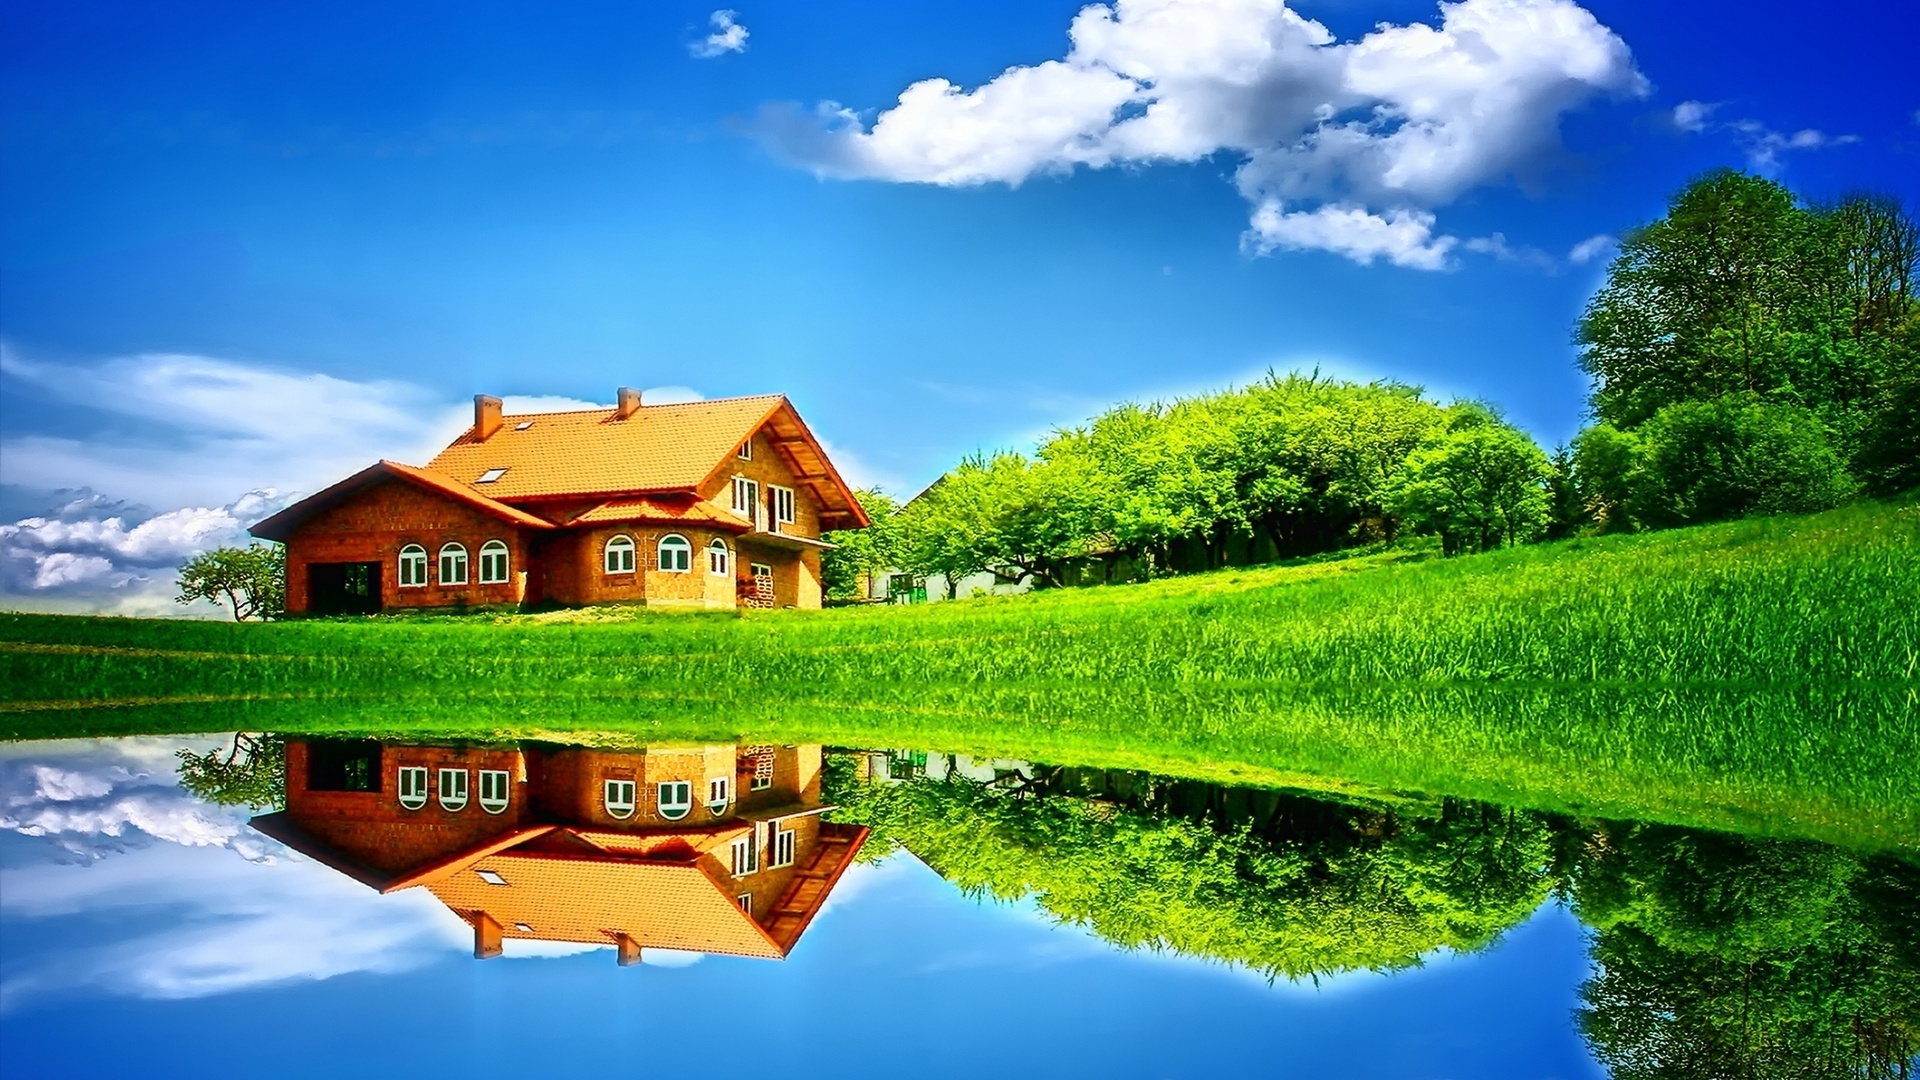 Home Images HD Wallpaper